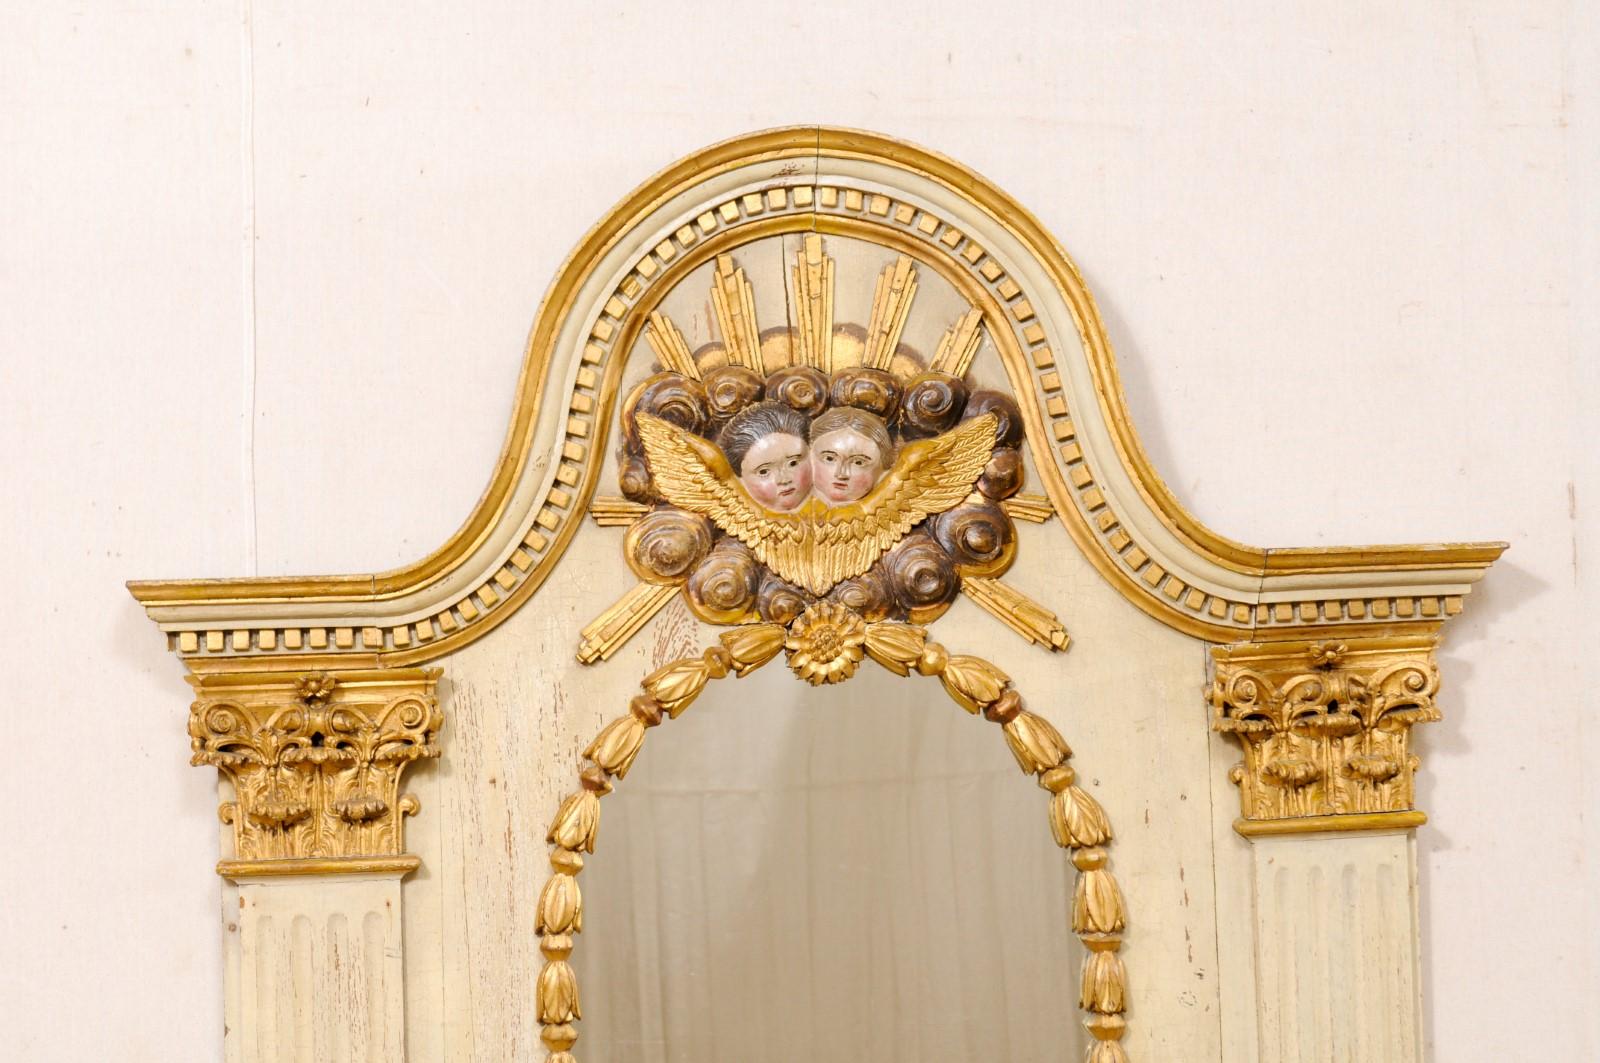 French Late 18th C. Mirror W/Pediment Top, Carved Cloudy-Ray Sunburst W/Cherubs In Good Condition For Sale In Atlanta, GA